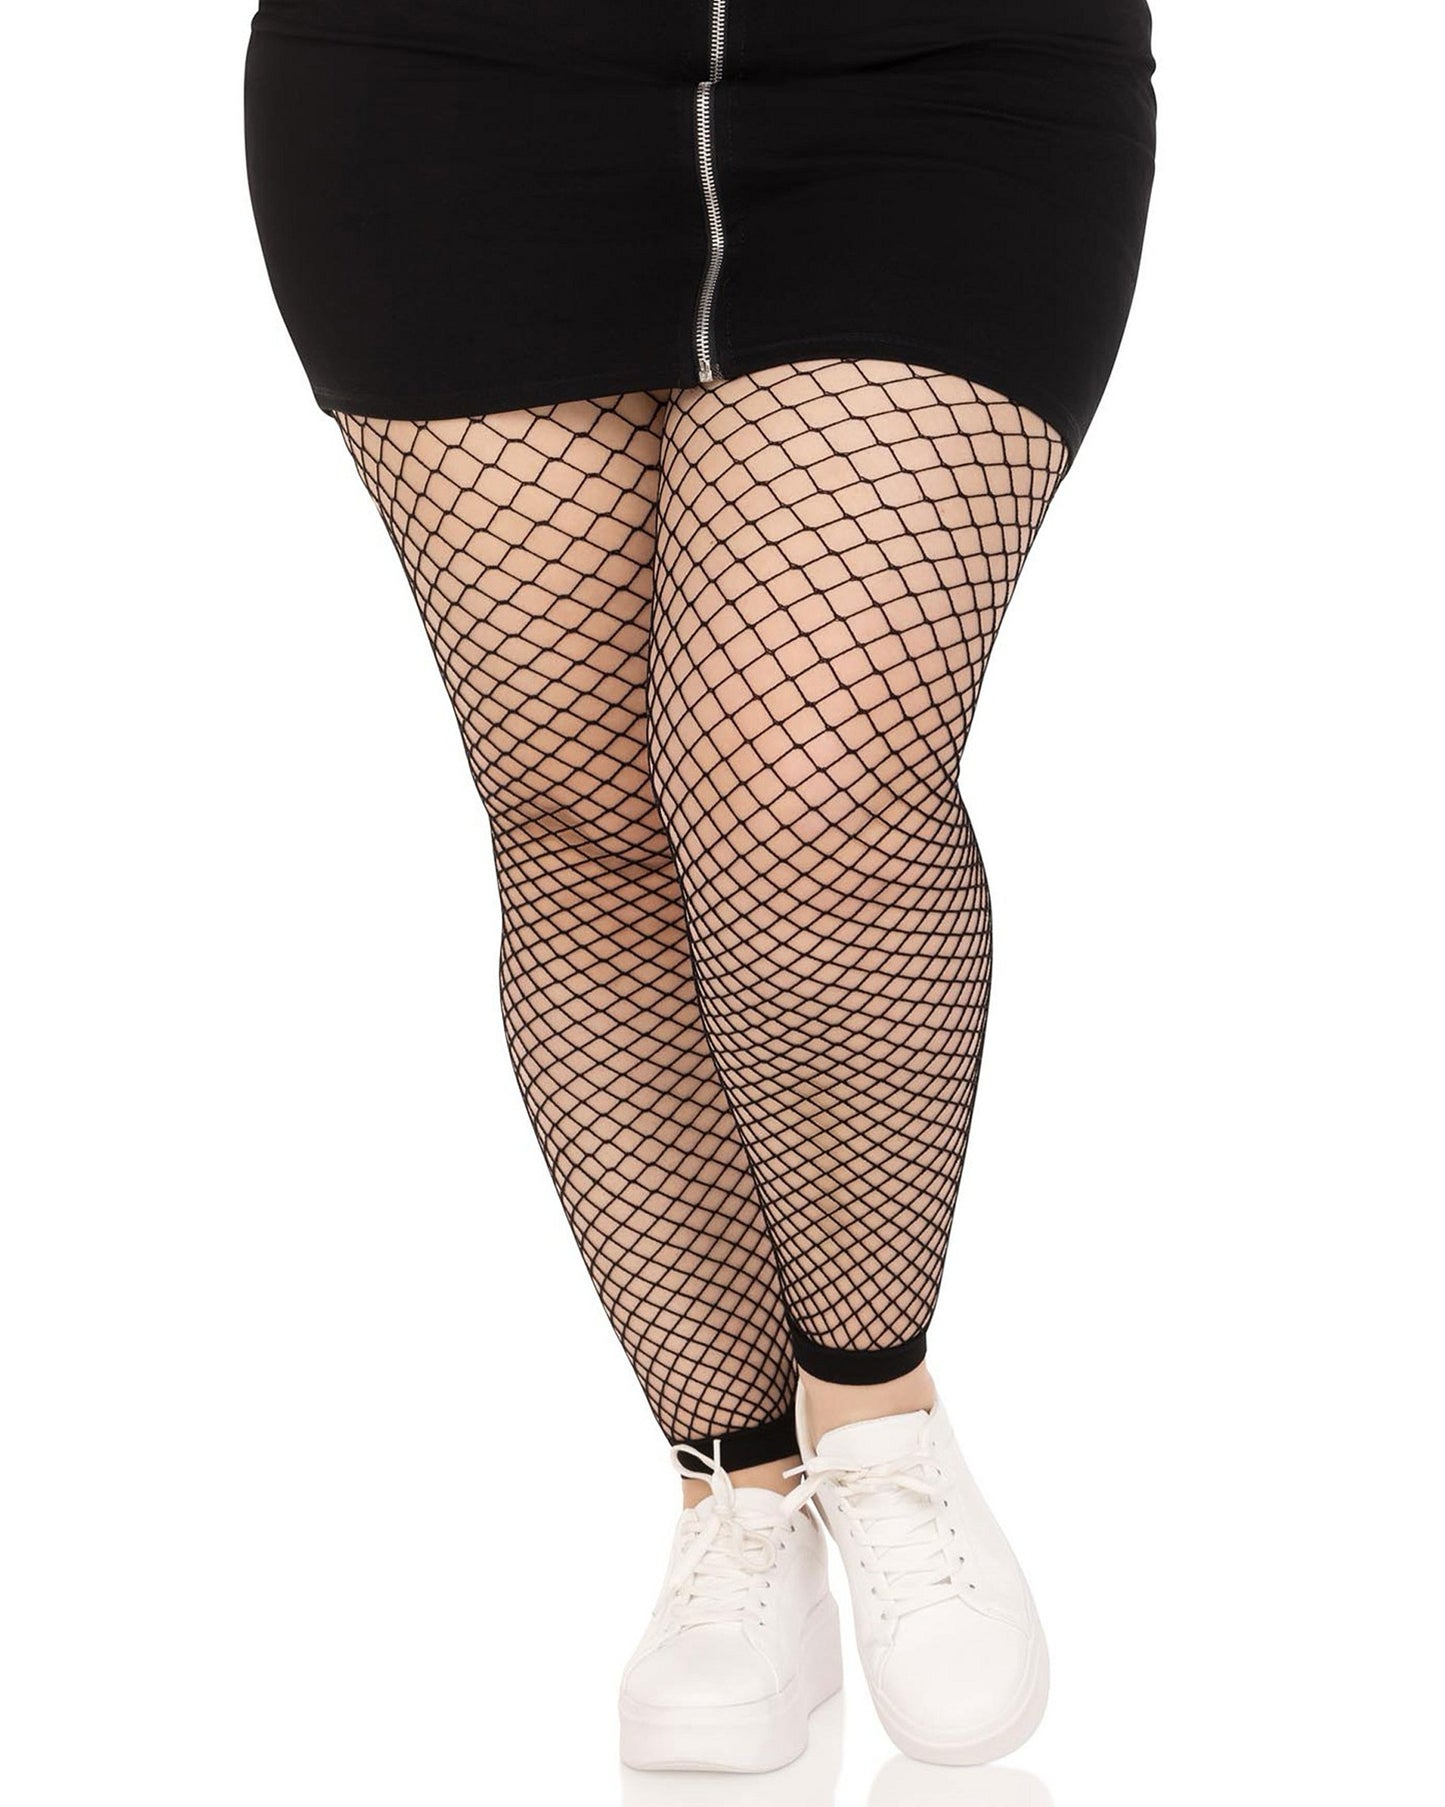 Leg Avenue - Industrial Net Footless Tights - Black diamond fishnet footless tights with high waist and deep elasticated cuff. Worn by a plus size model with black skirt and white sneakers.